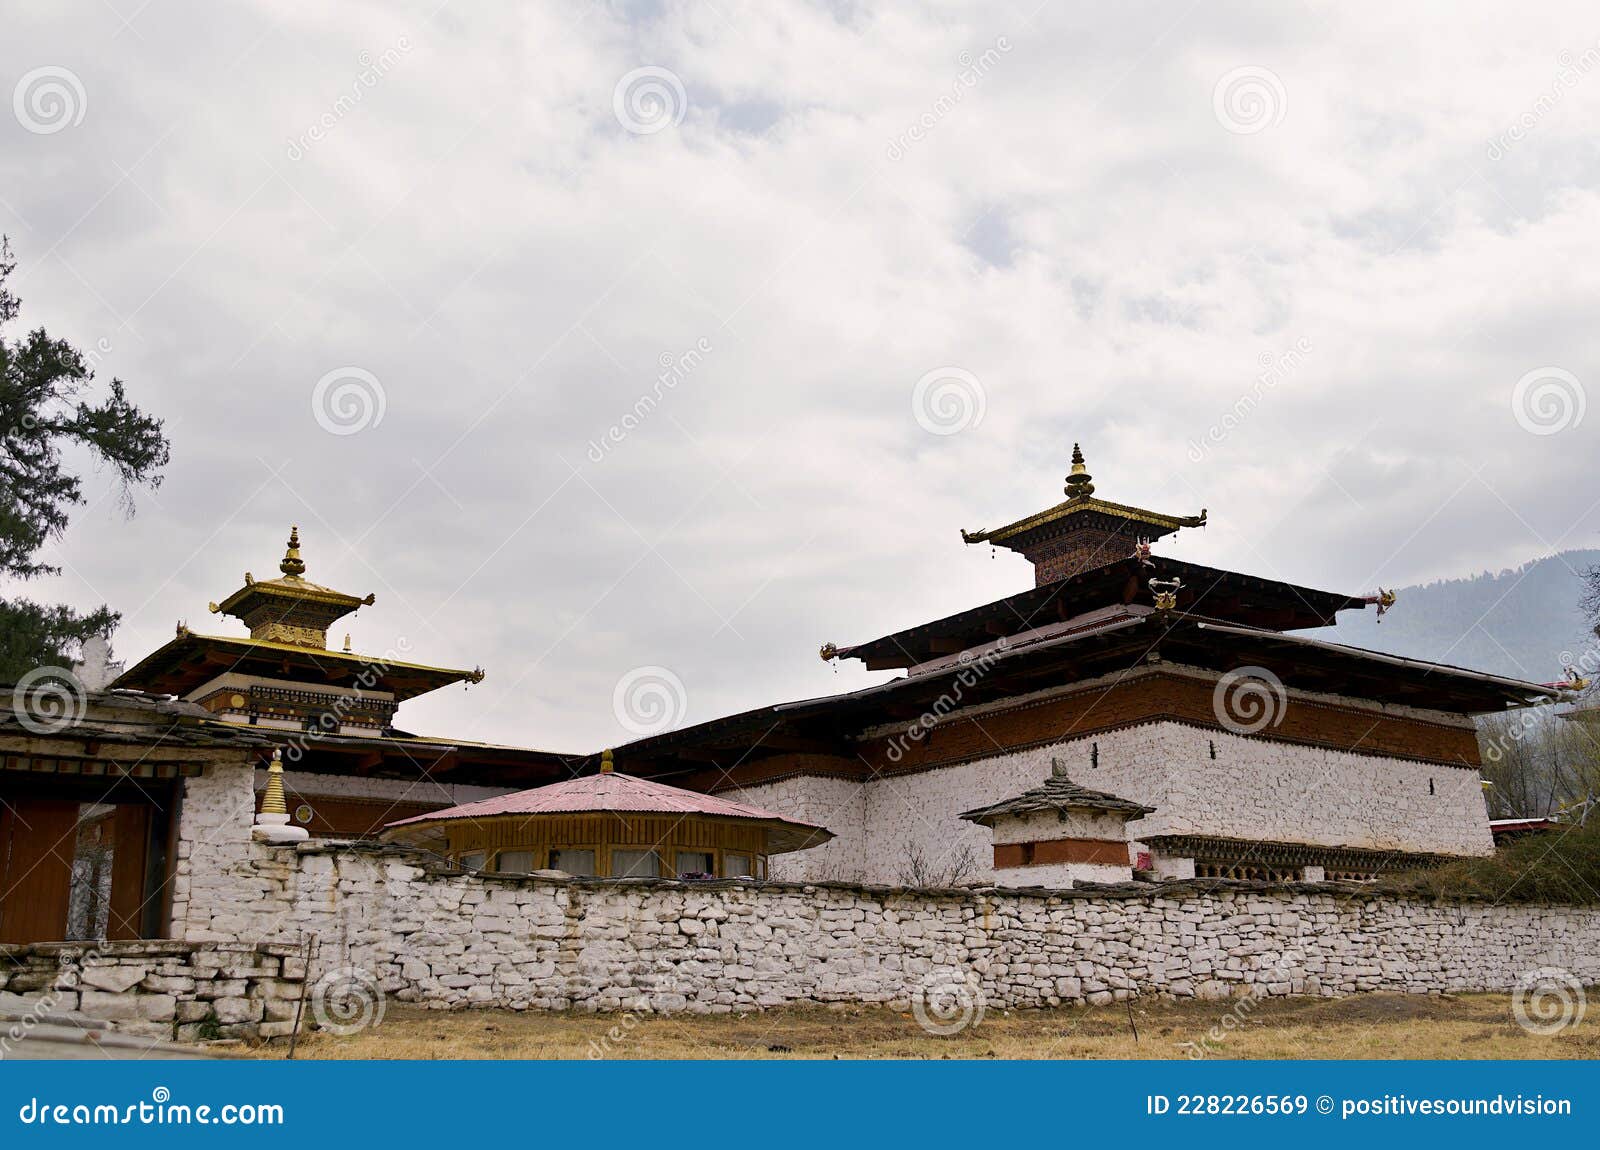 exterior of kyichu lhakhang, a seventh-century buddhist monastery revered as one of the most important sites of worship in bhutan